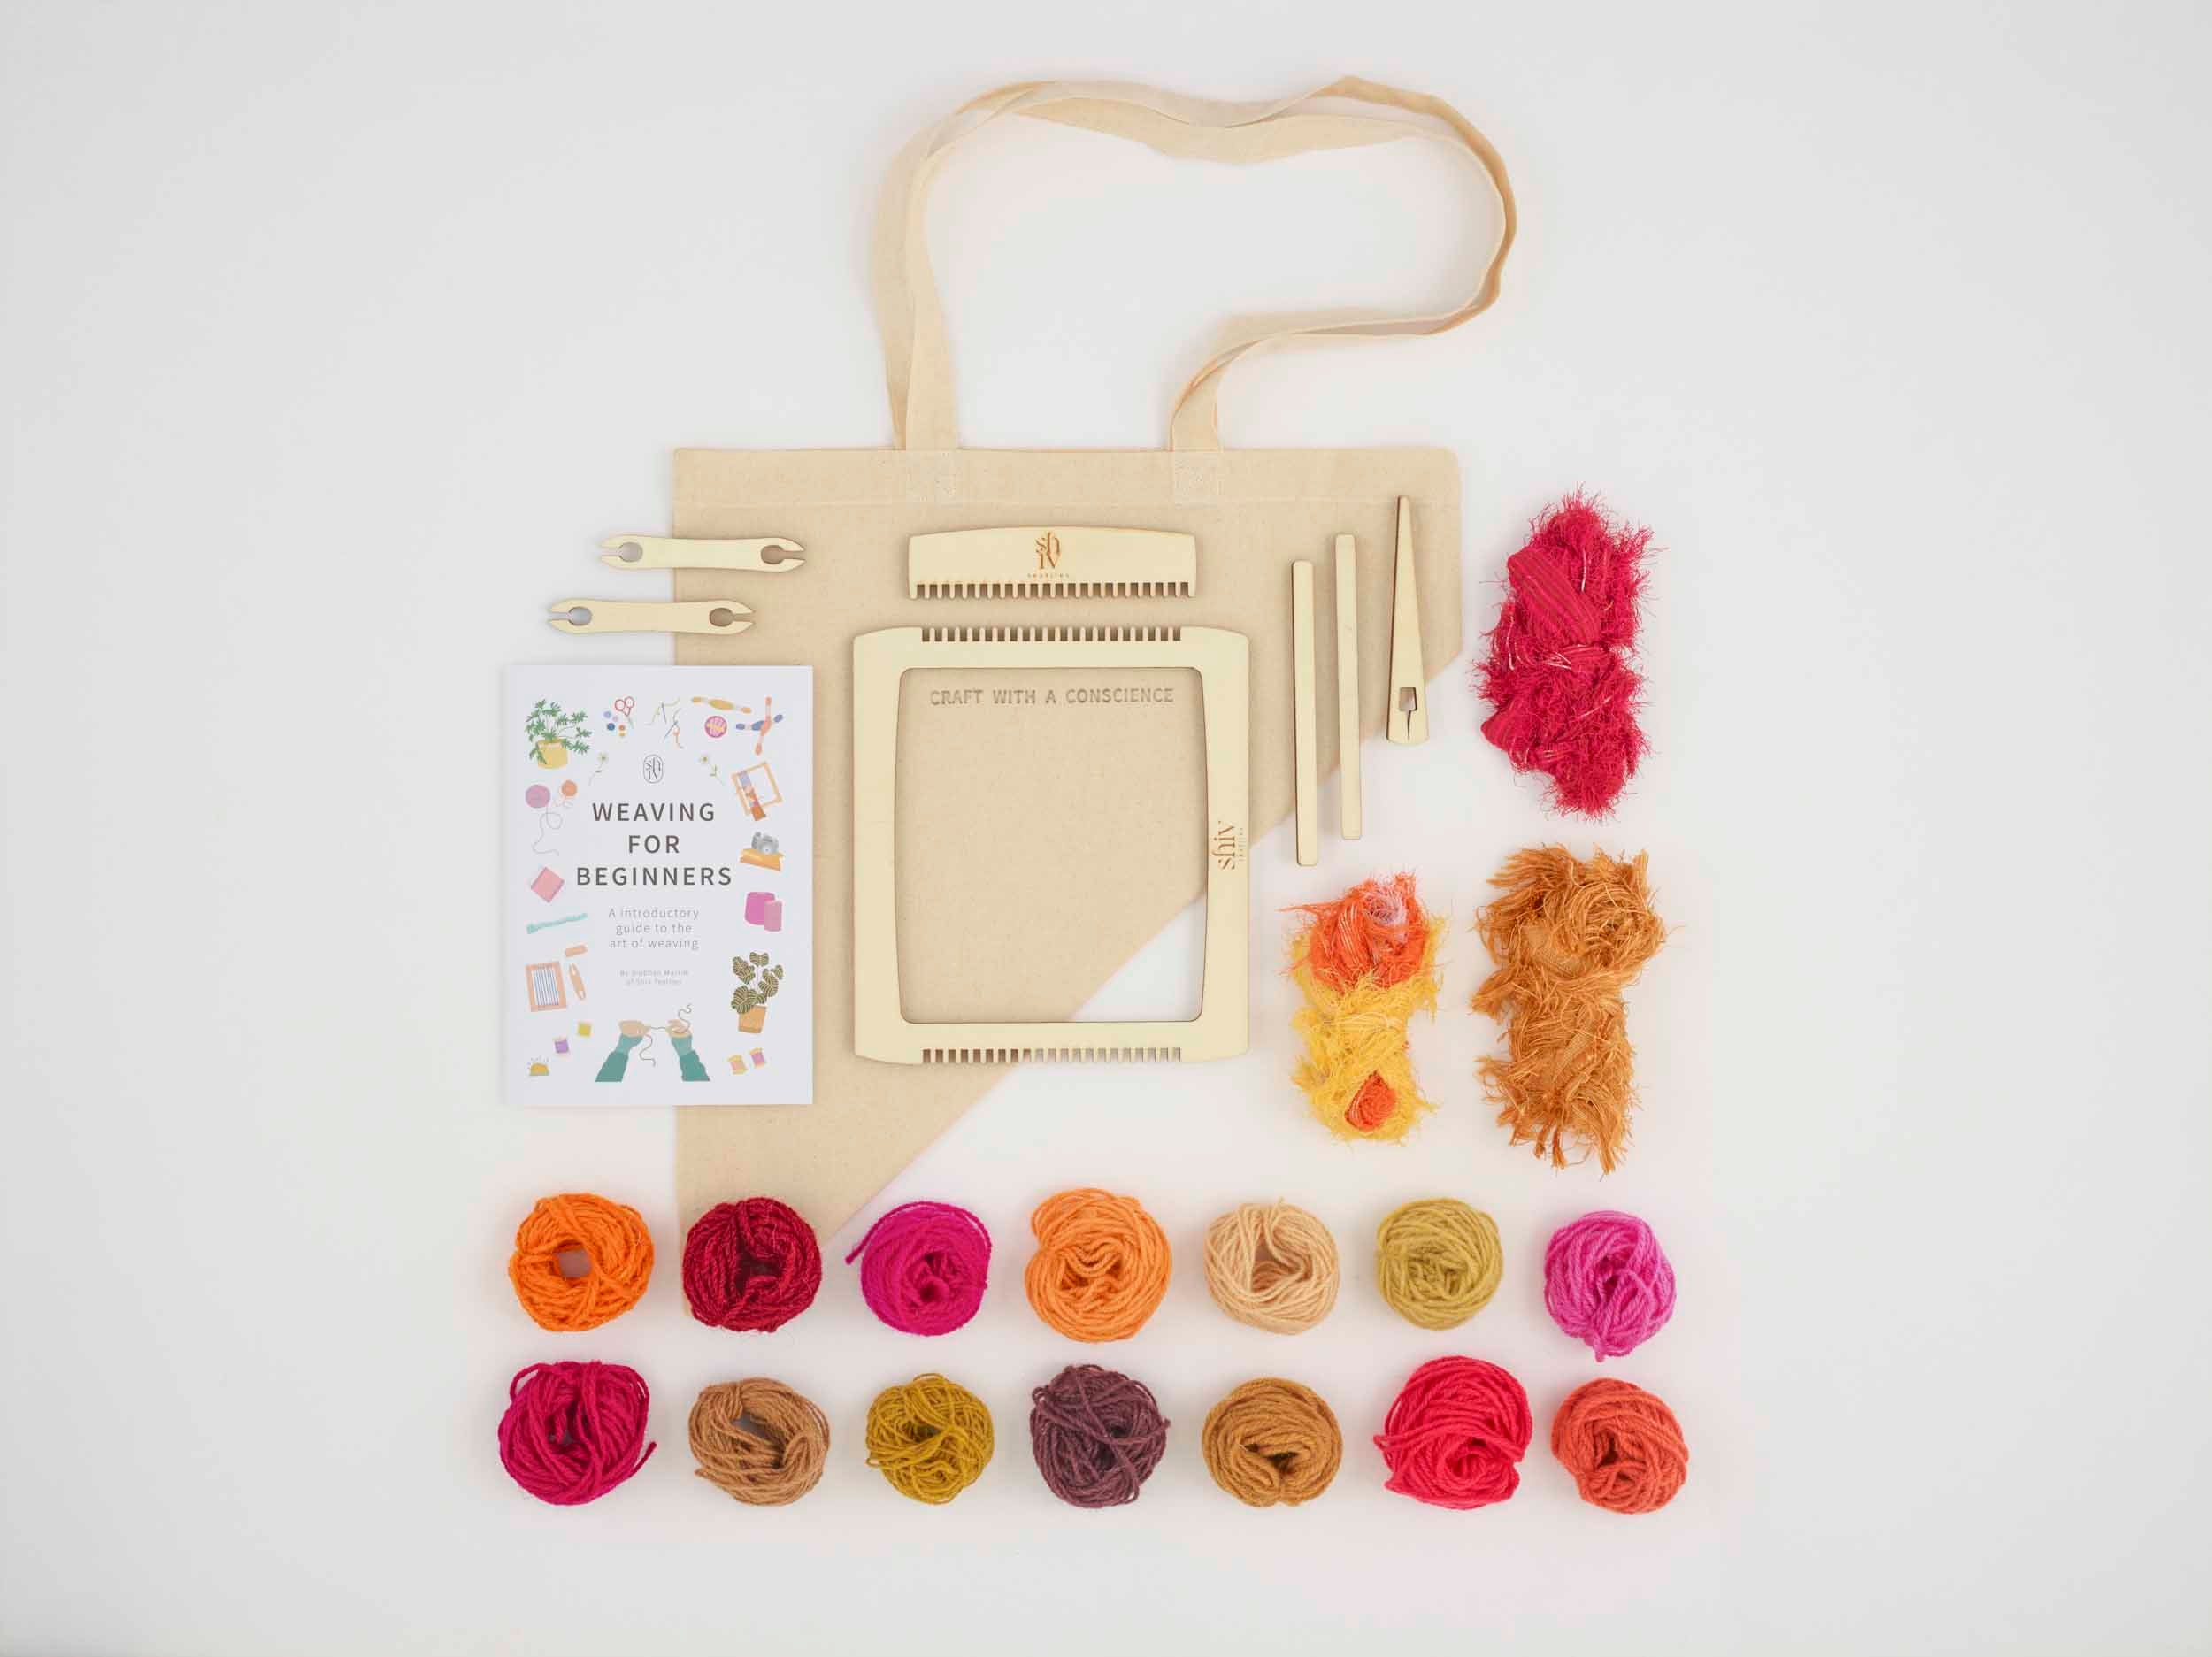 Macramé: The Step-by-Step Guide for Beginners With a Language That Even a  5-Year-Old Kid Can Understand.